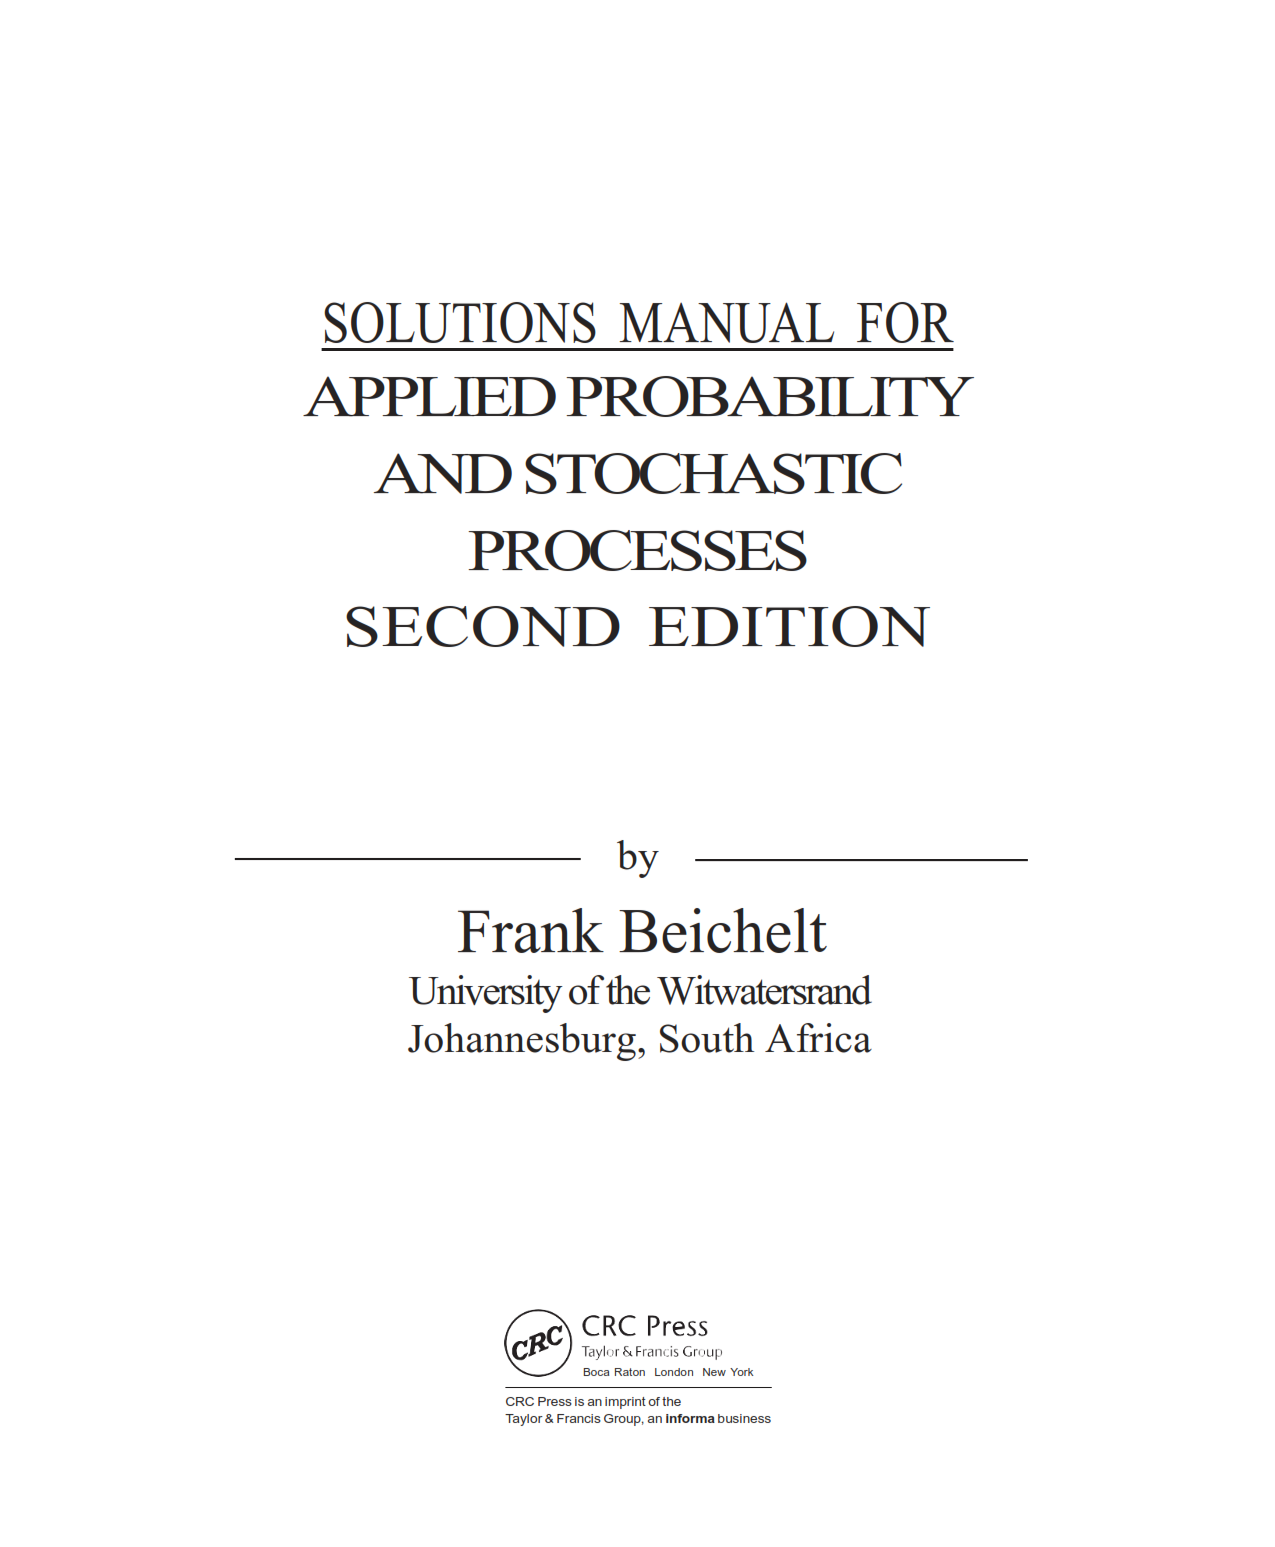 Download free applied probability and stochastic processes Frank Beichelt 2nd edition solutions manual pdf | Gioumeh solution